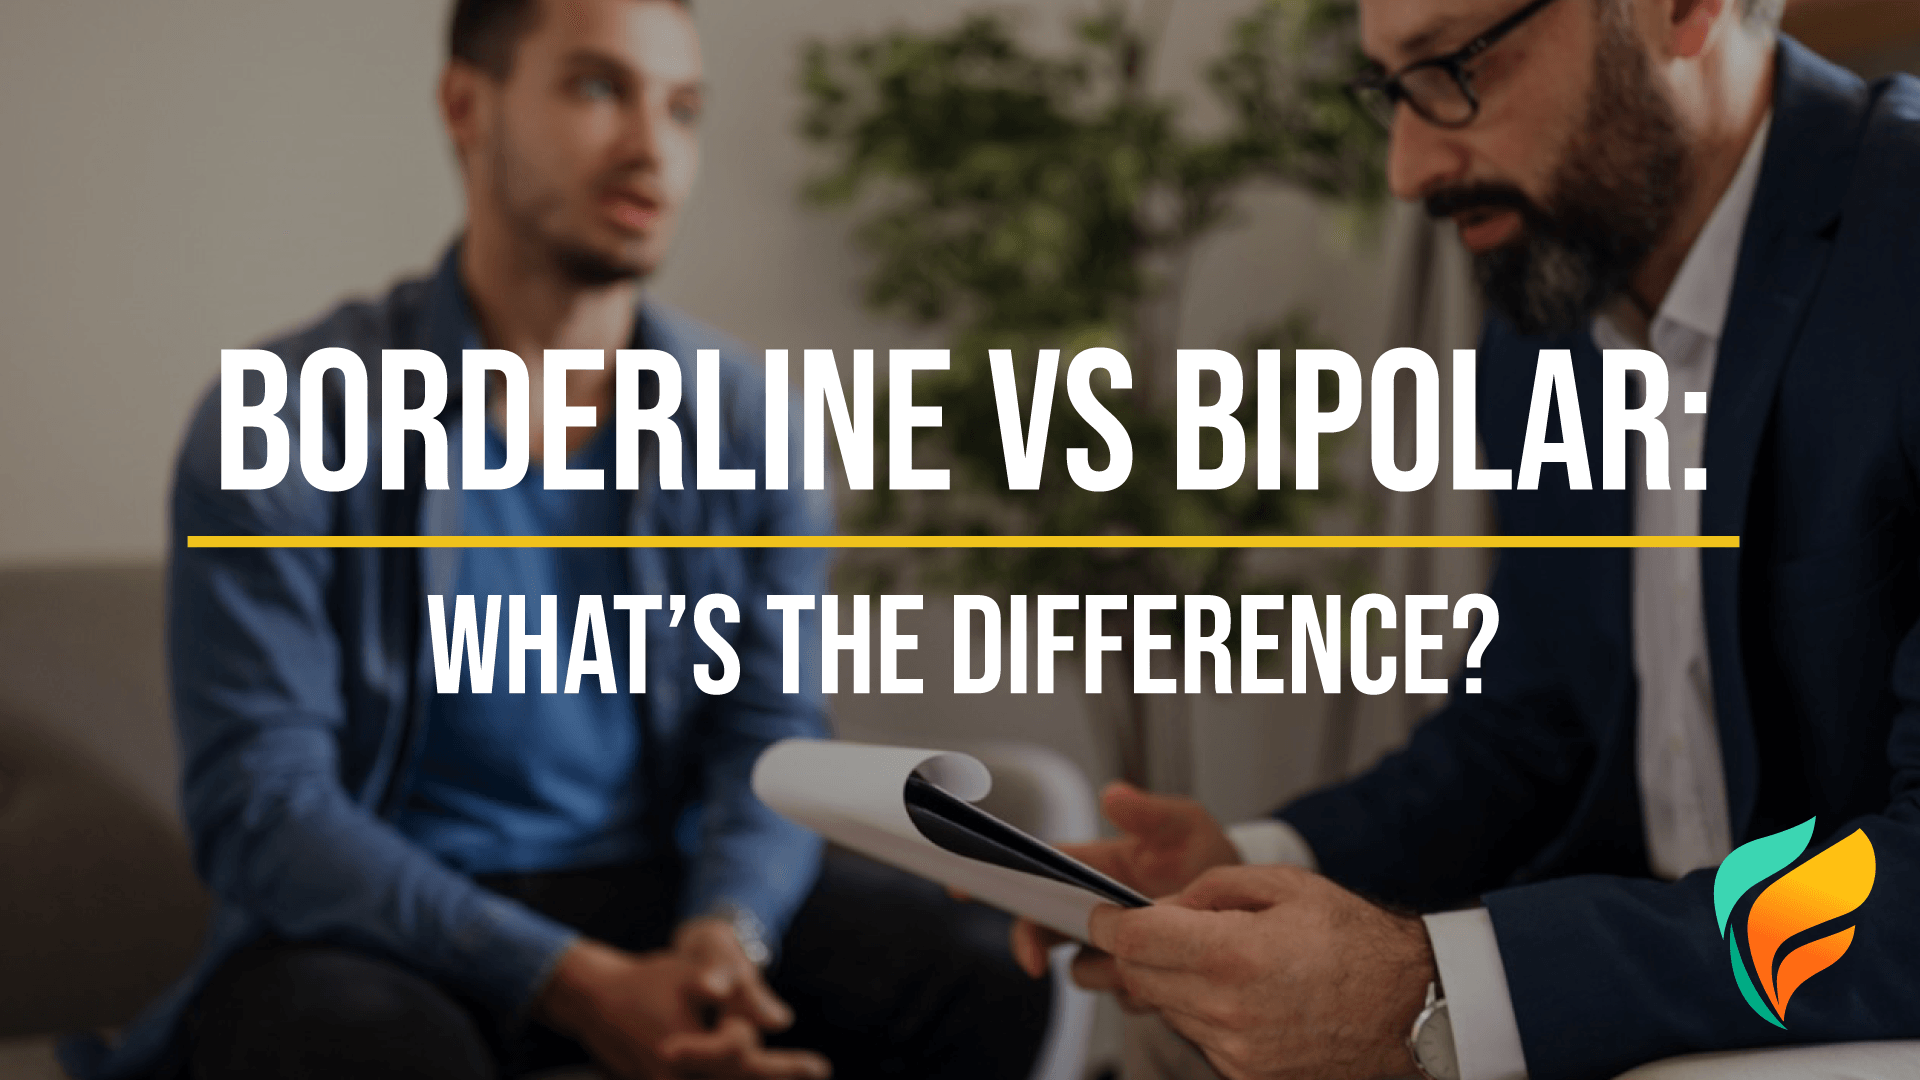 Borderline vs Bipolar: Do You Know the Differences Between Them?